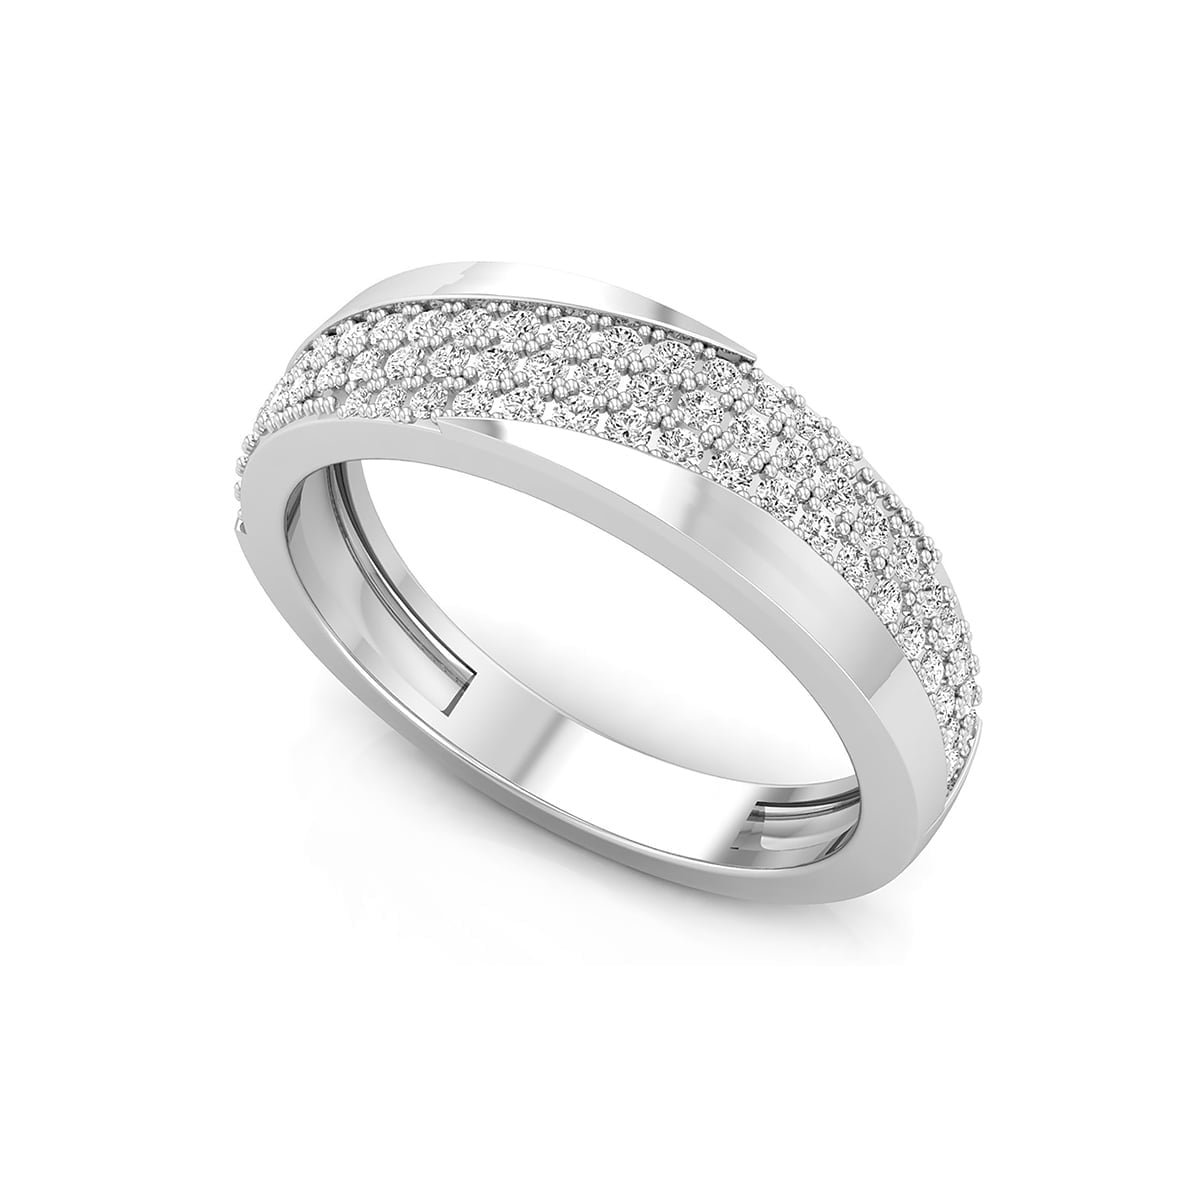 Men's Round Cut Moissanite Pave Set Half Eternity Wedding Band Ring In 925 Sterling Silver